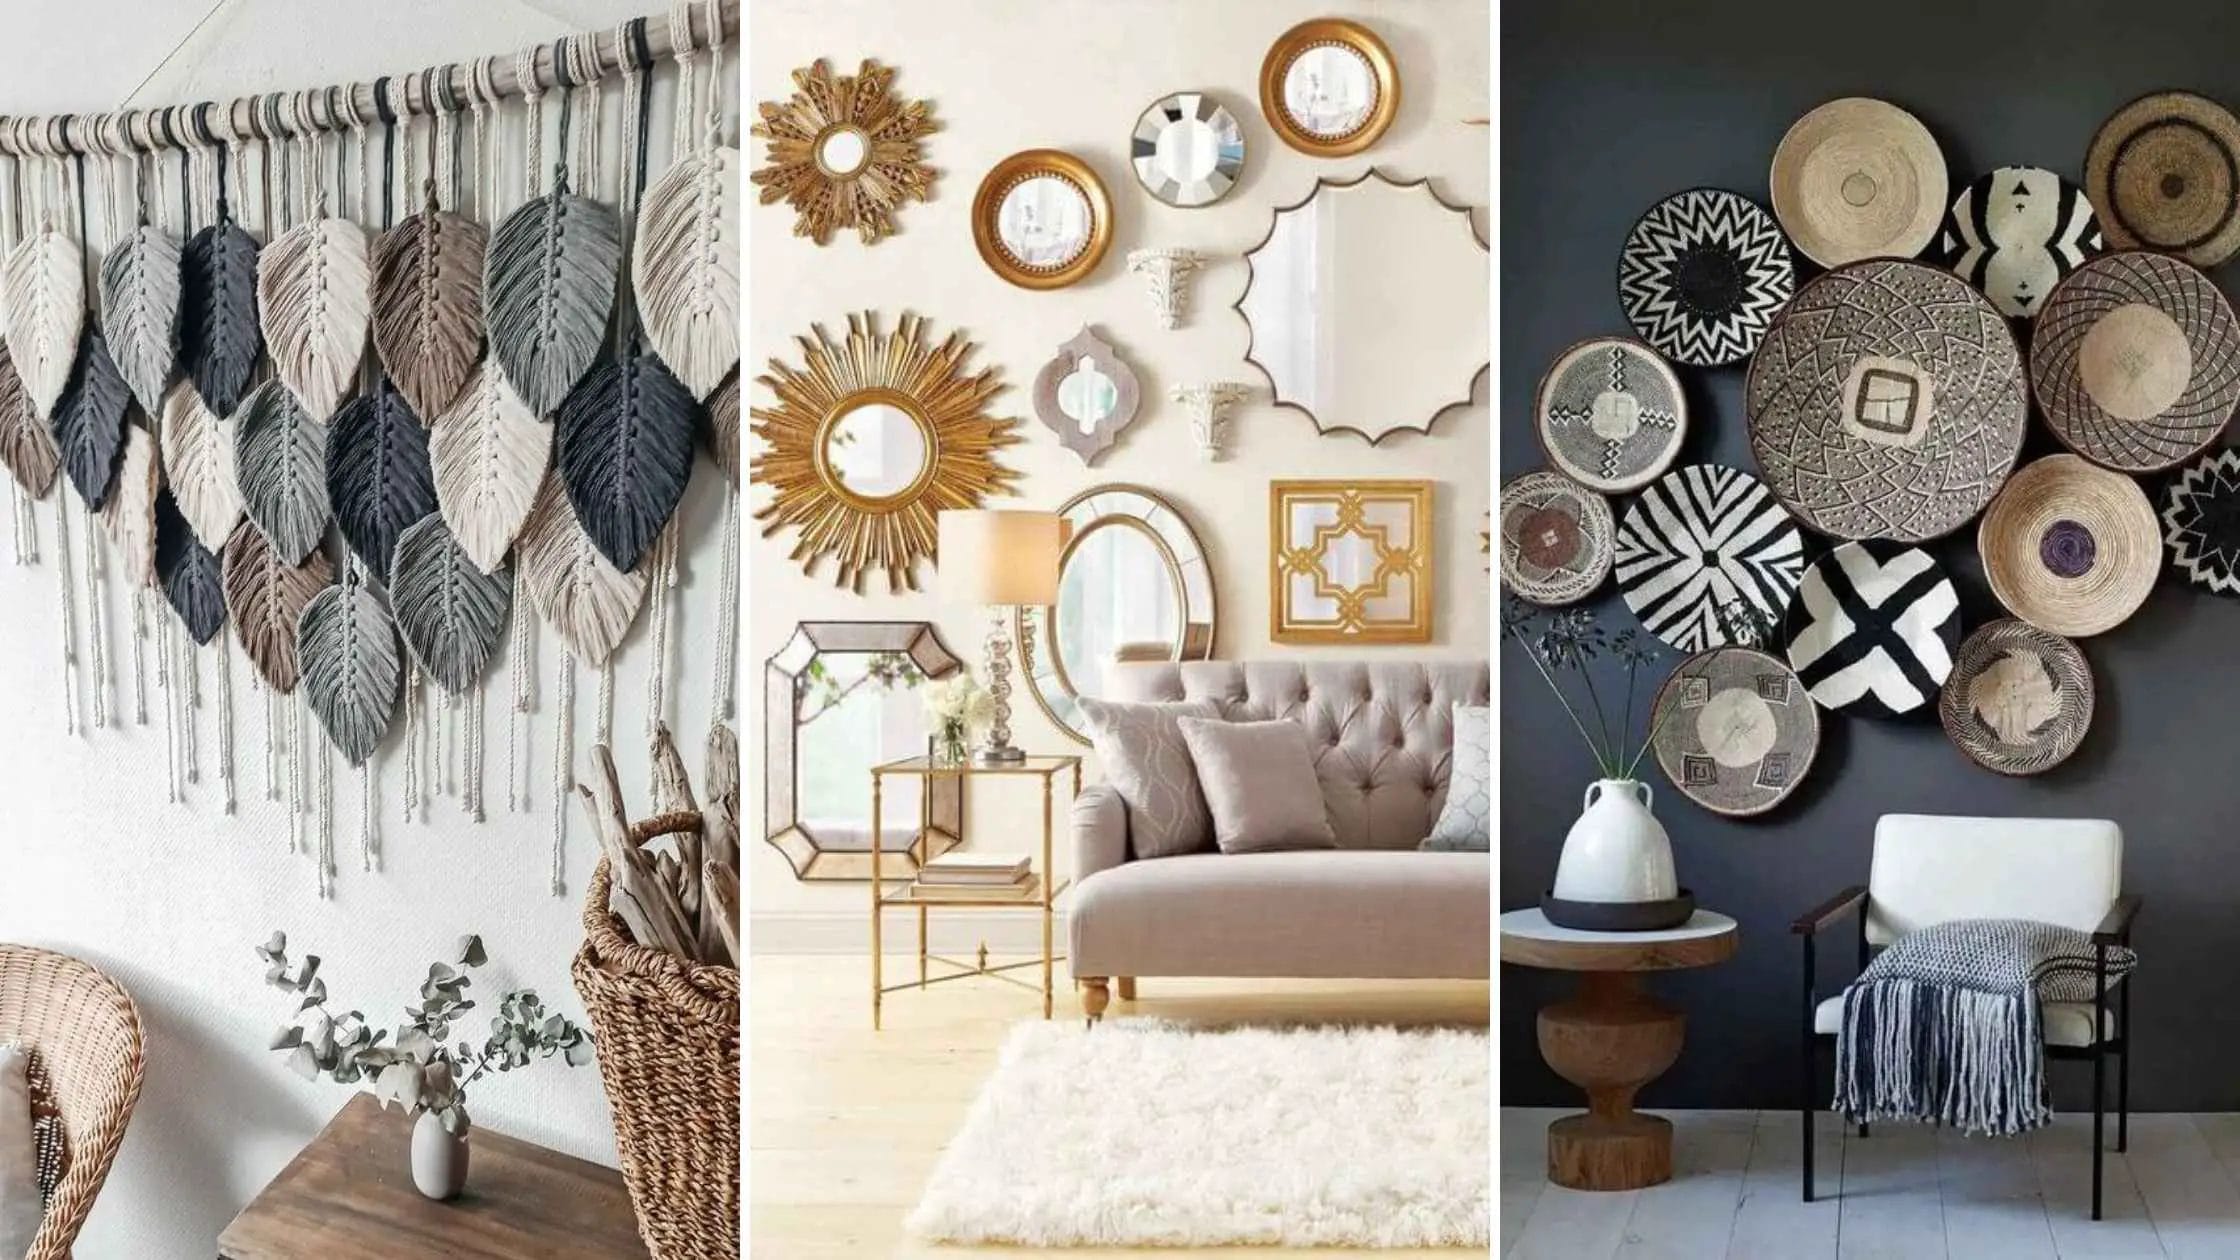 Home Wall Hanging Decor Ideas